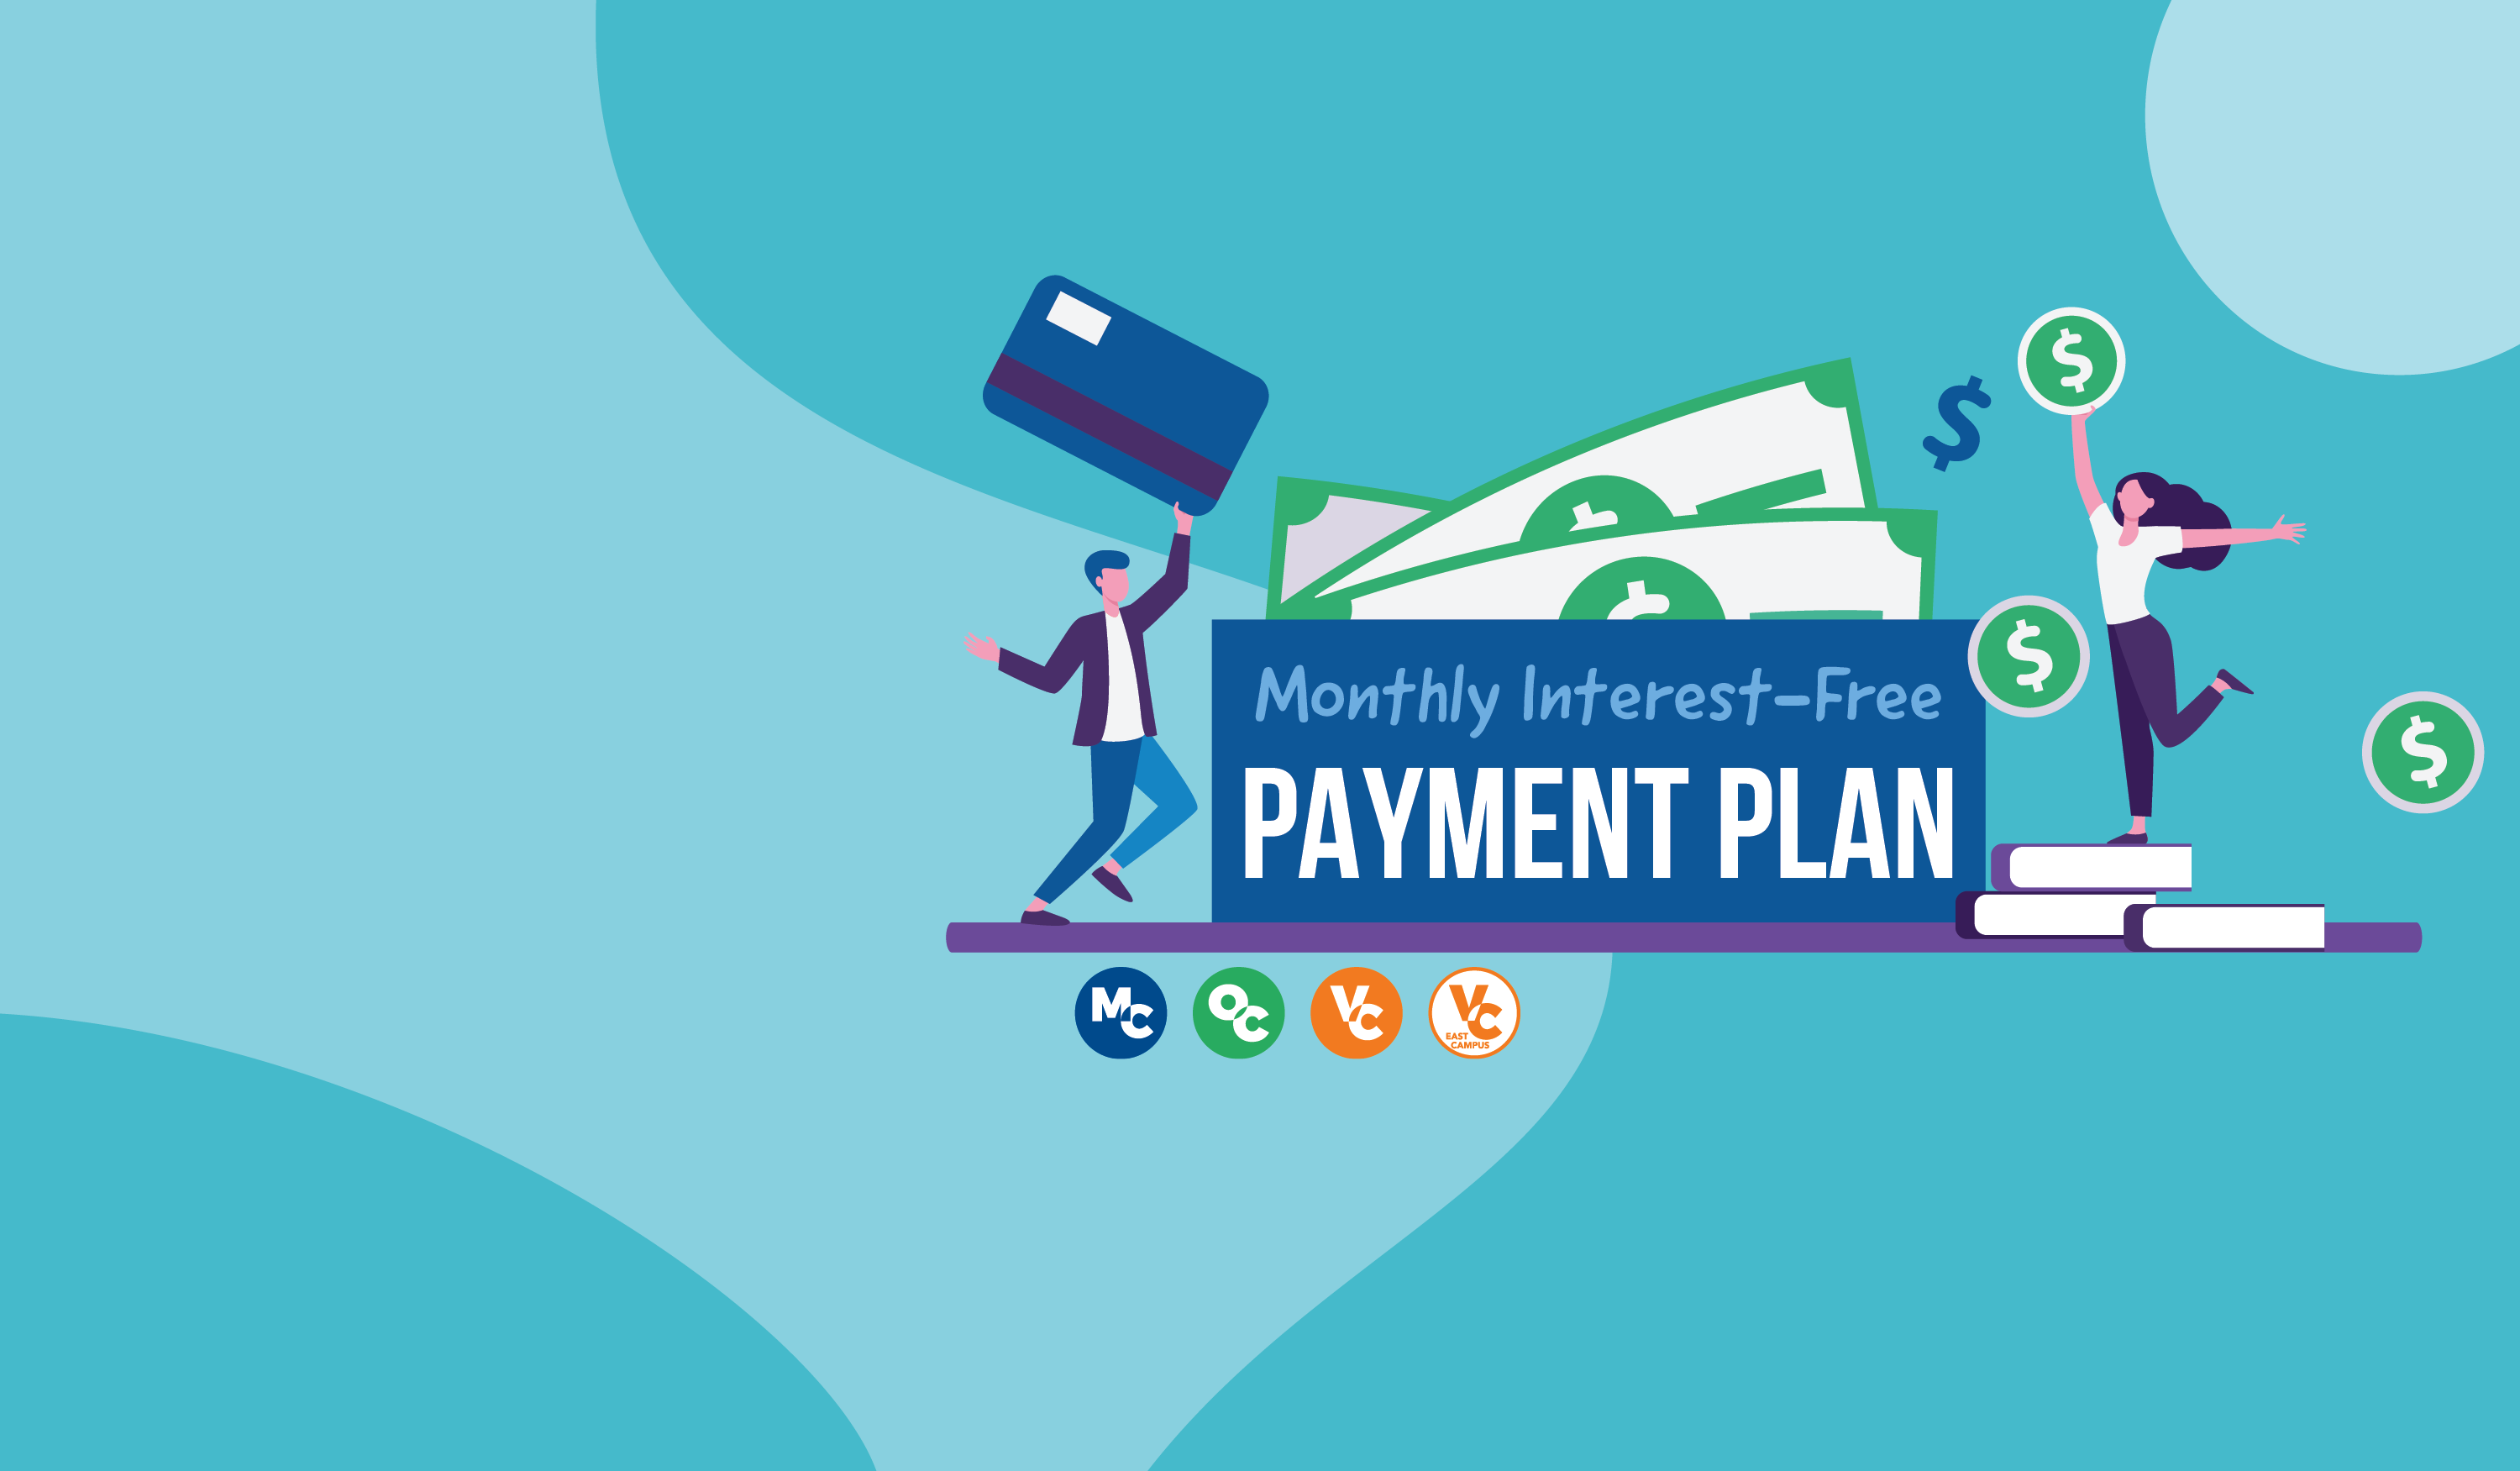 Monthly Interest-Free Payment Plan